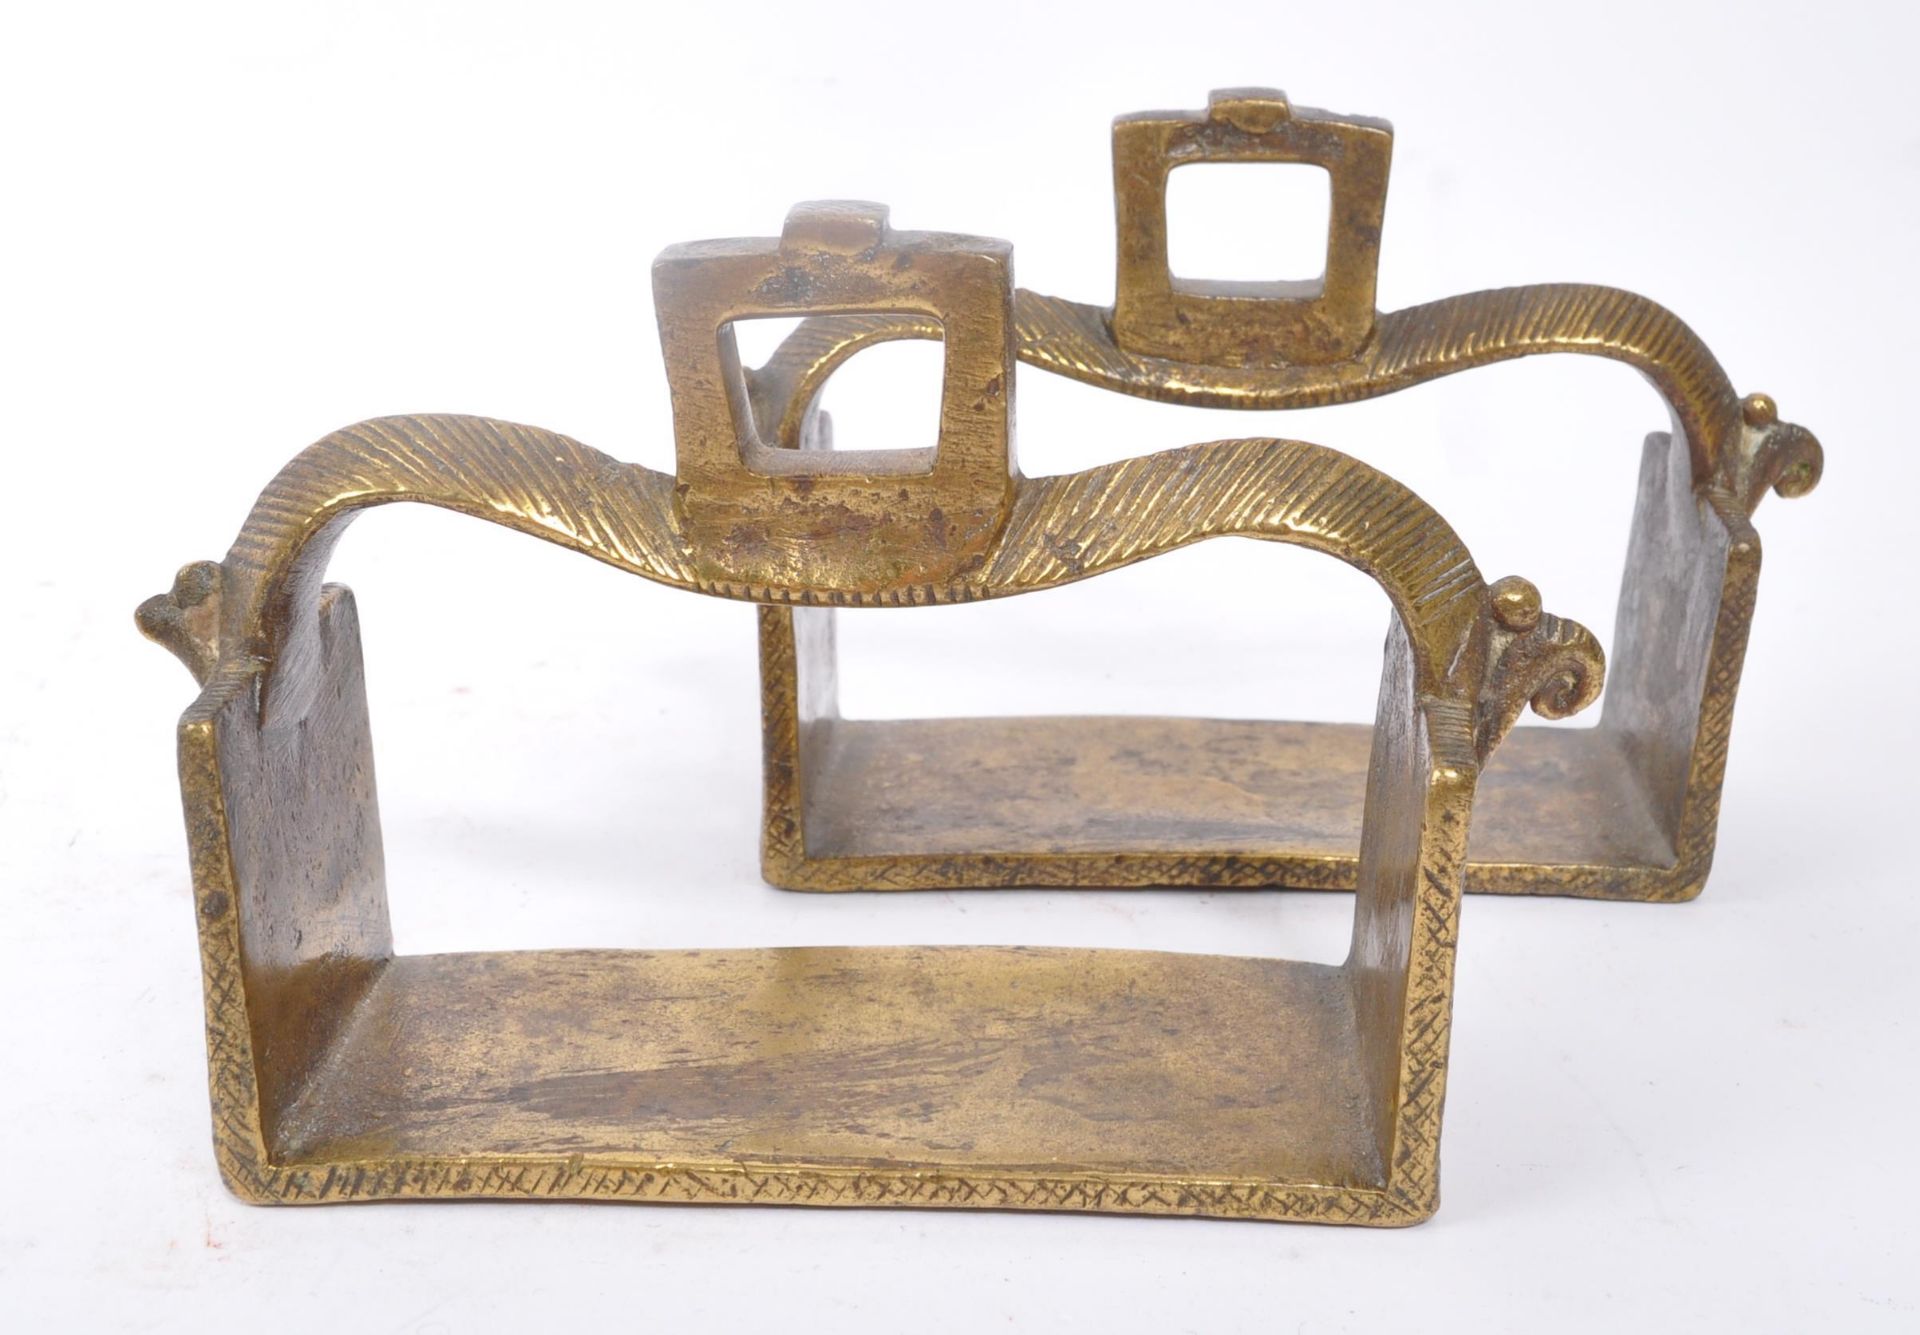 PAIR OF 19TH CENTURY BRASS INDIAN HORSE STIRRUPS - Image 5 of 6